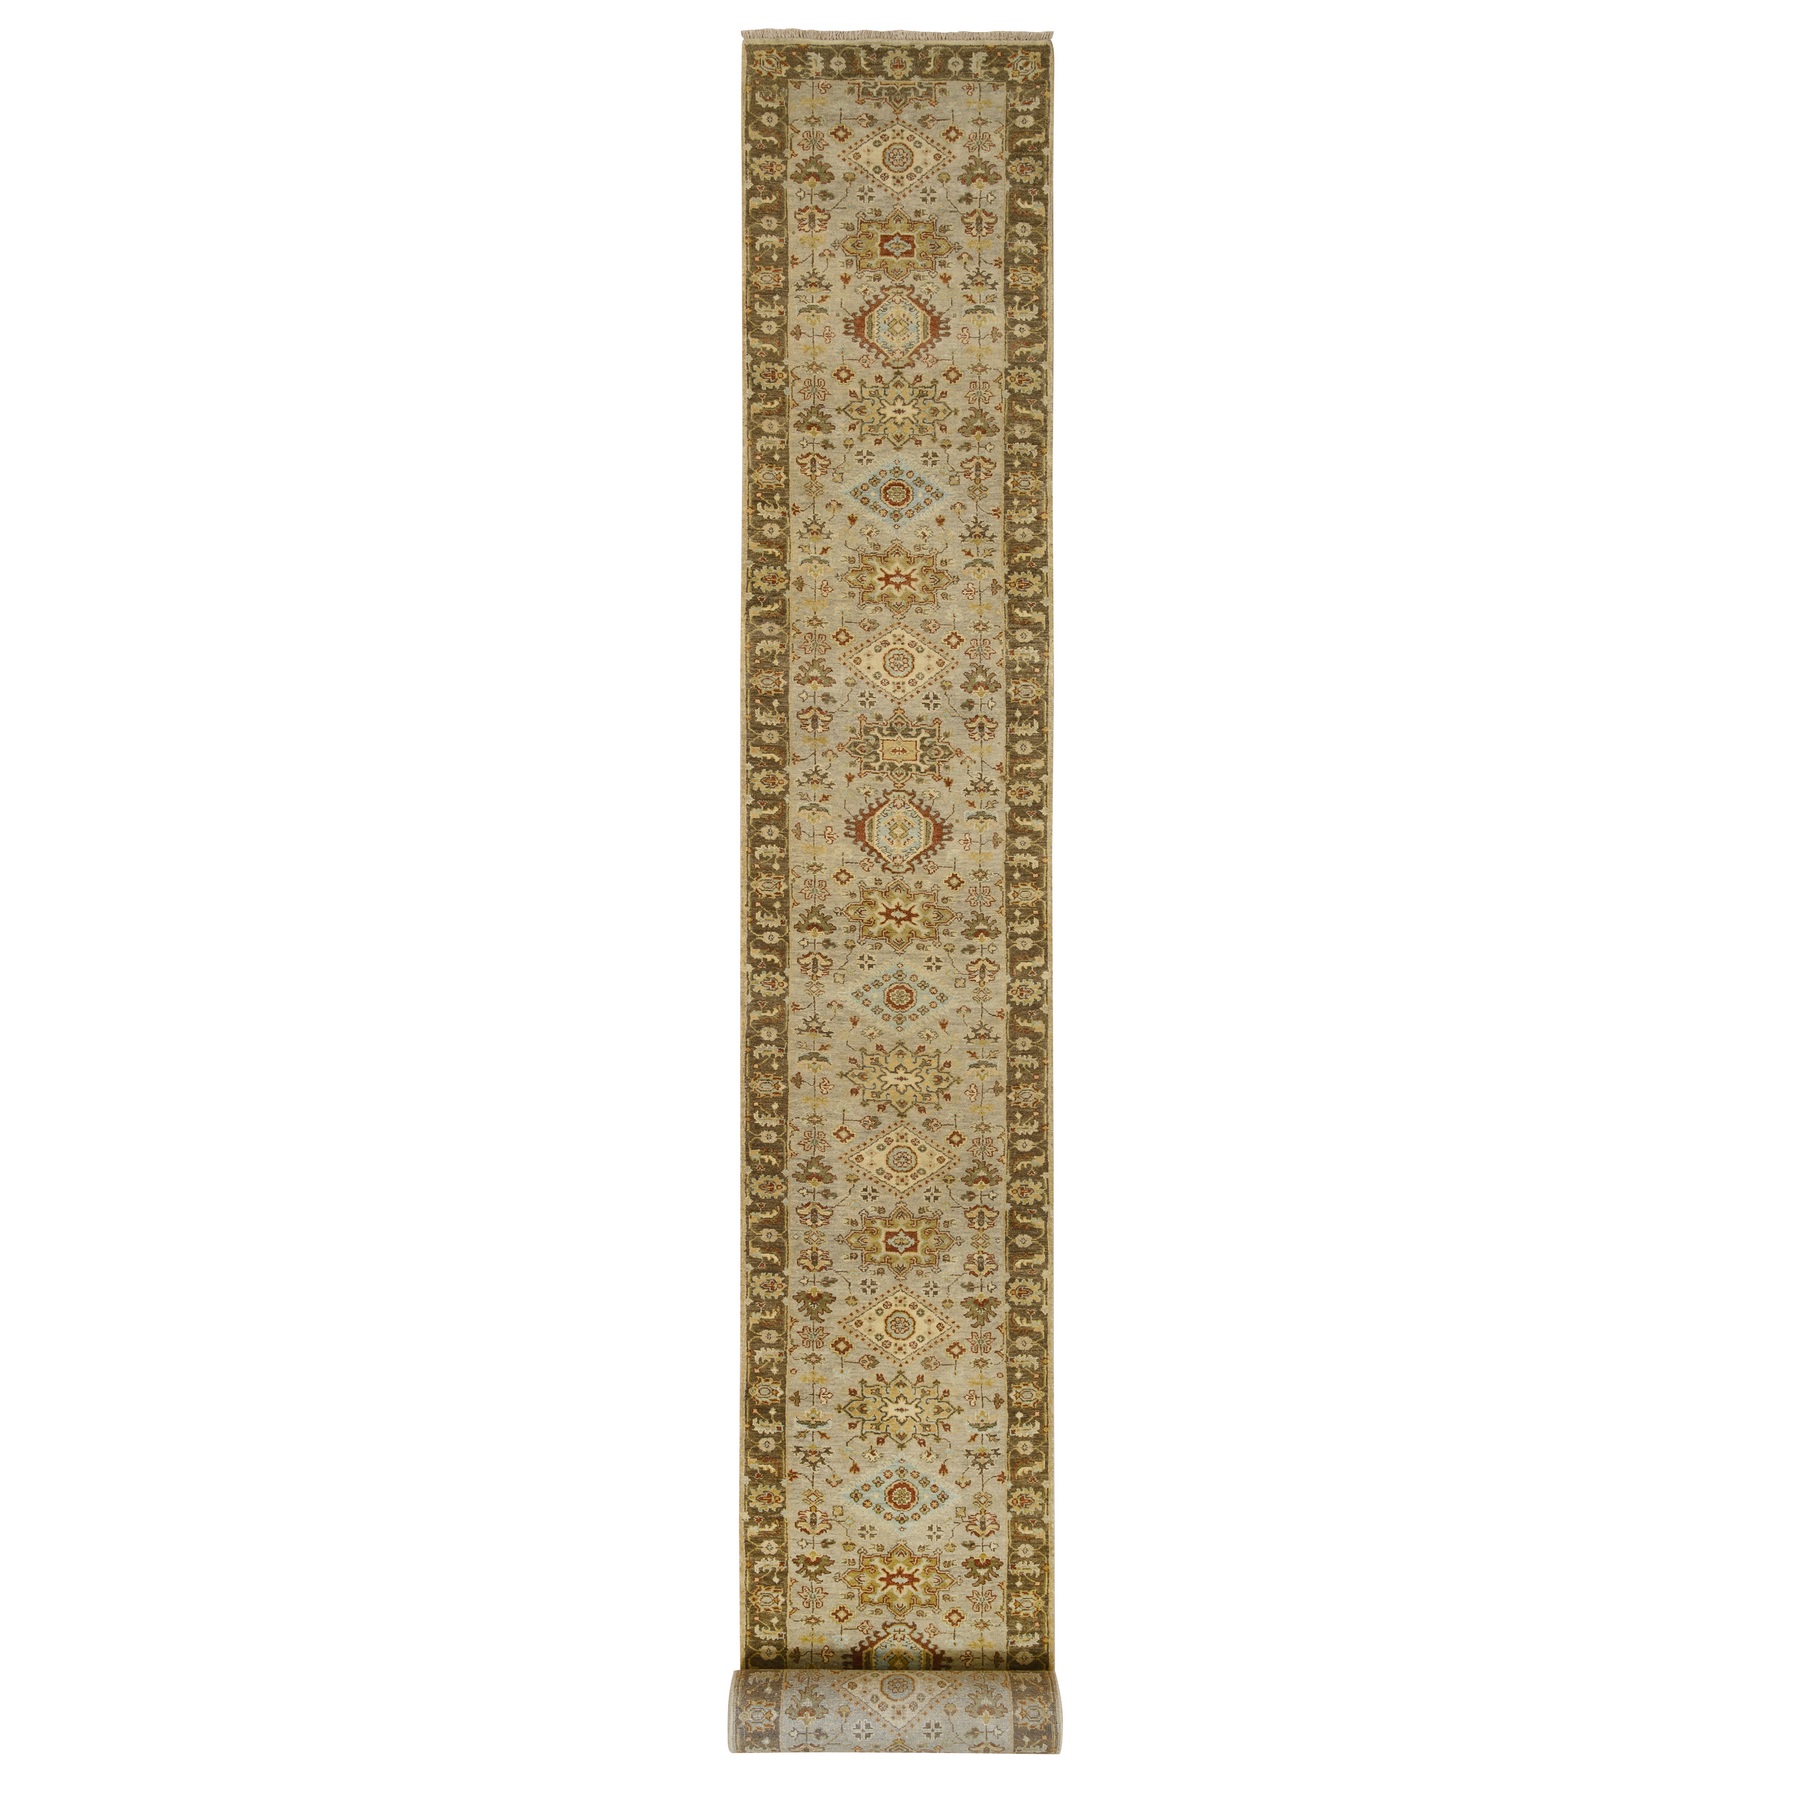 2'8x19'10" Gray-Brown Karajeh Design with Tribal Medallions Hand Woven Pure Wool Oriental Runner Rug 